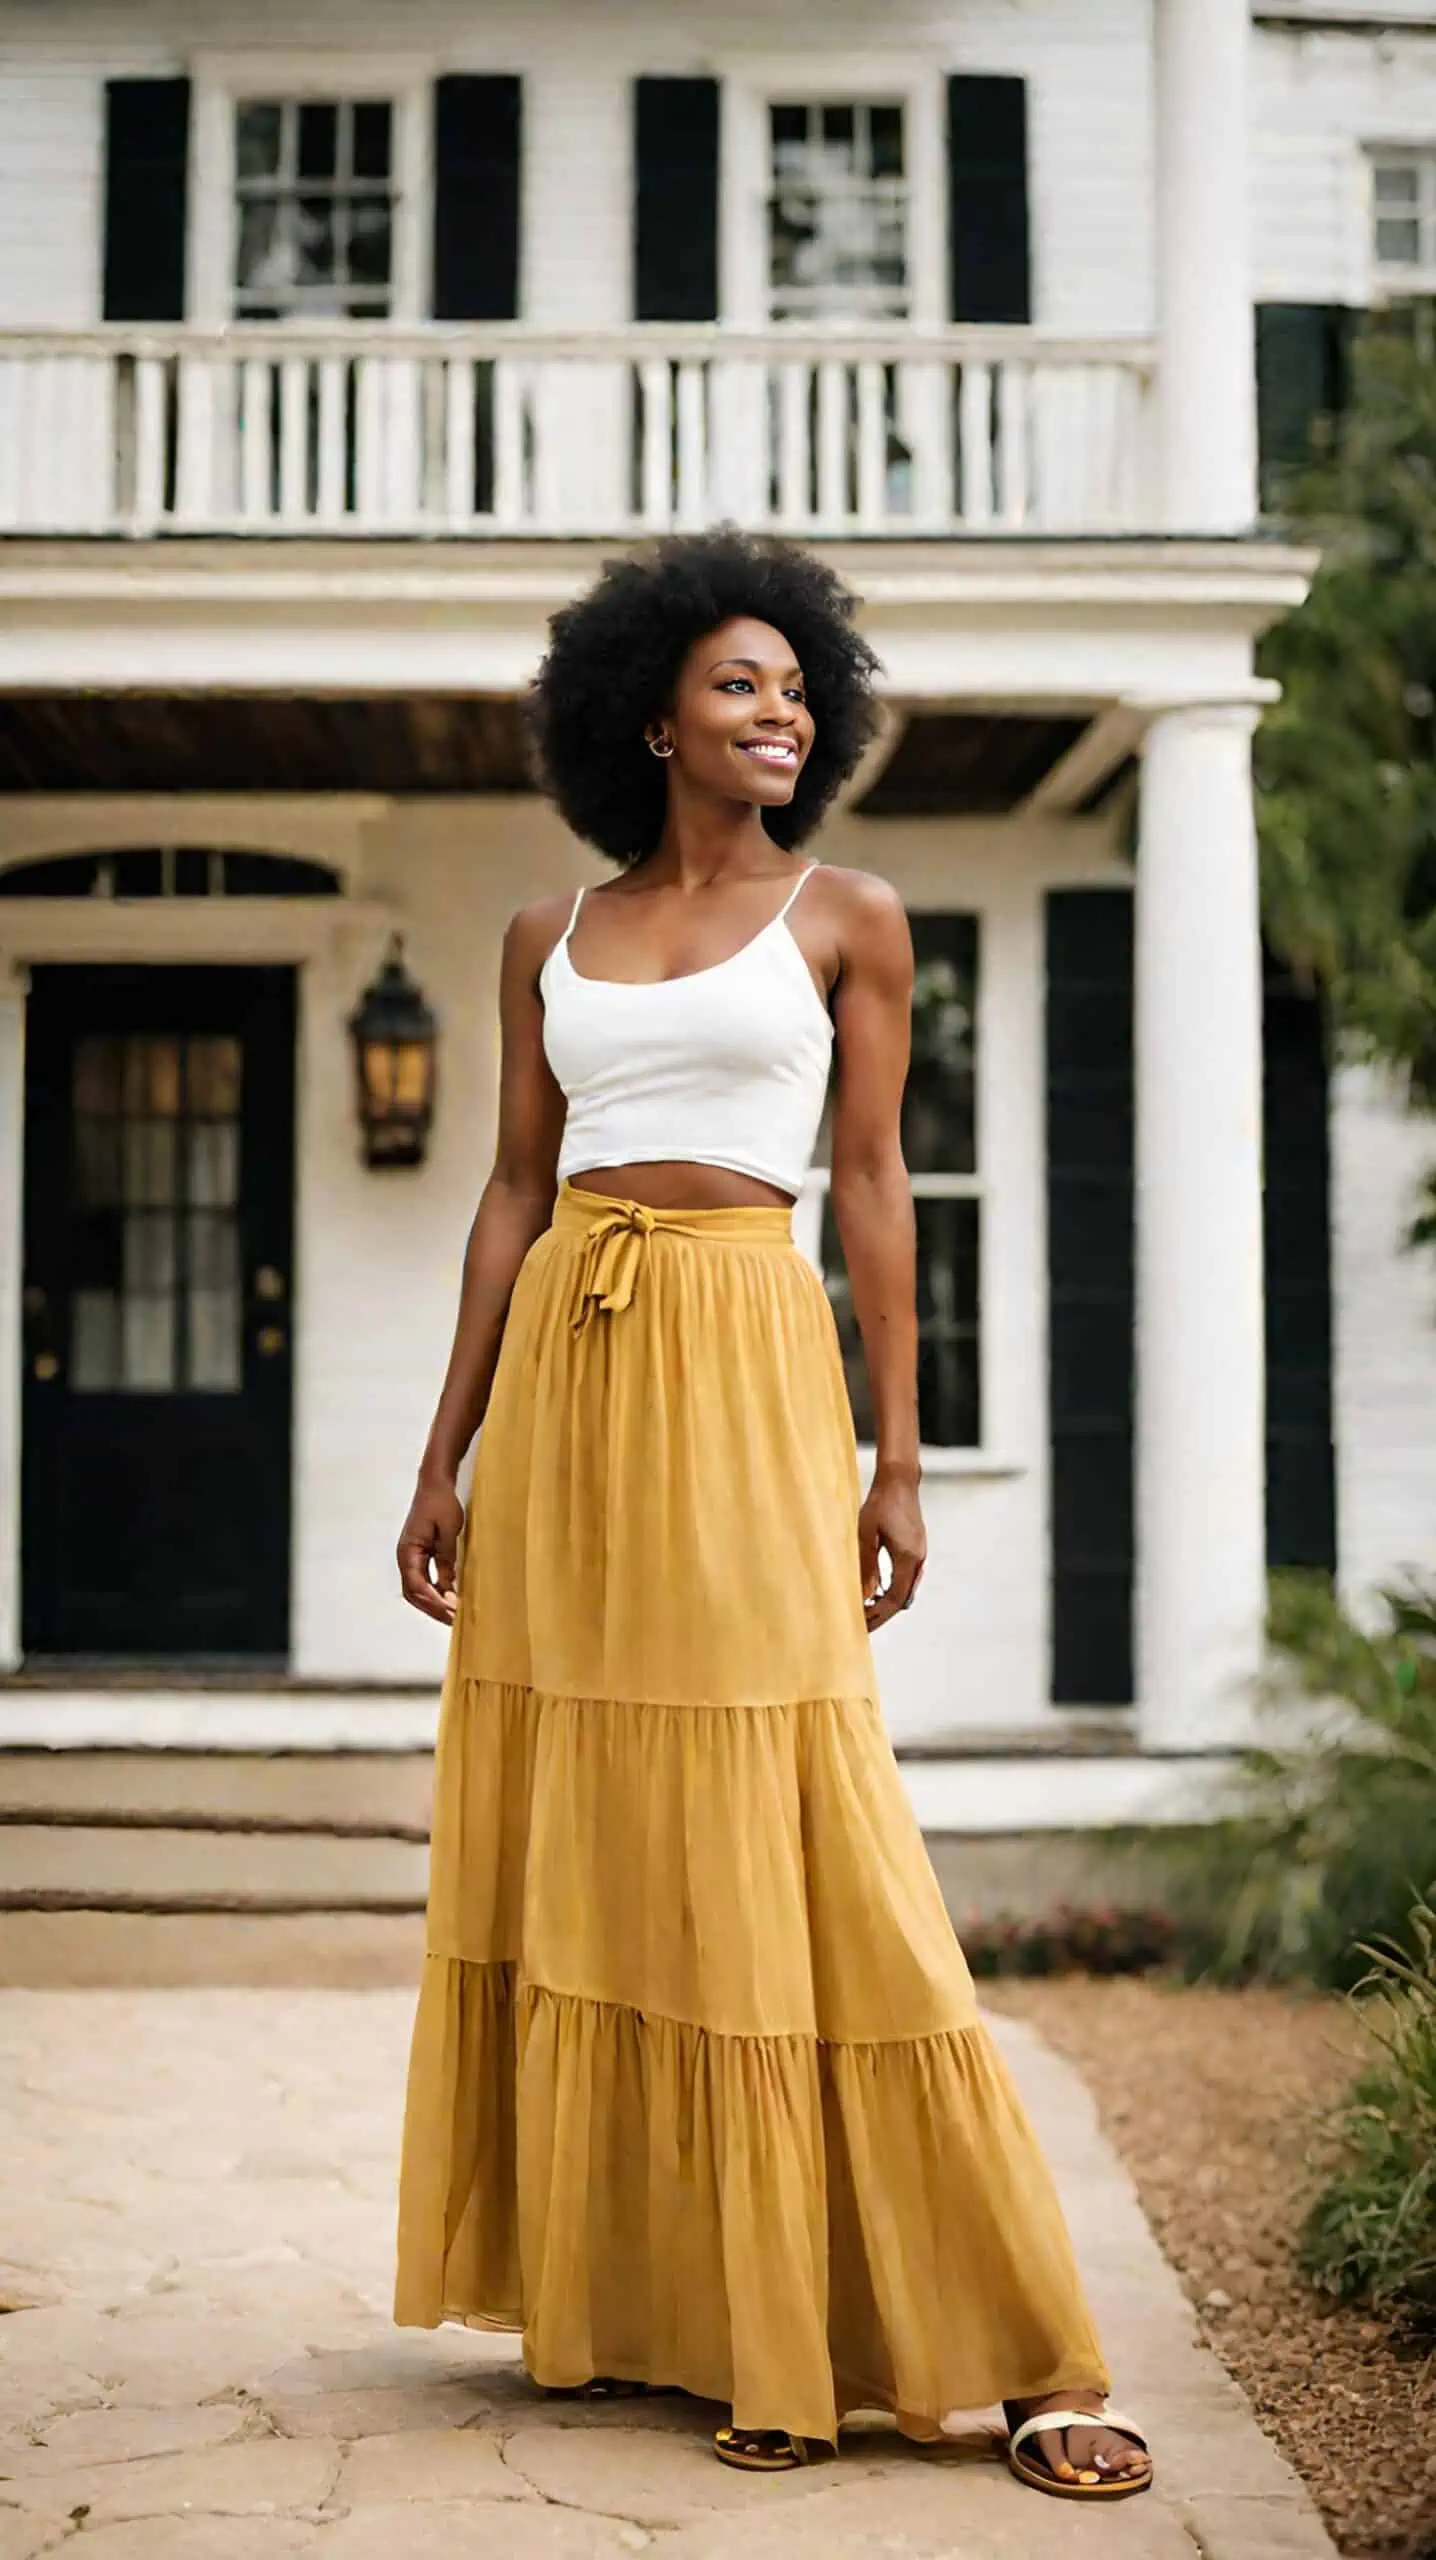 Fabulous Ways To Wear Your Skirt For All Occasions | by Fashinscoop | Medium